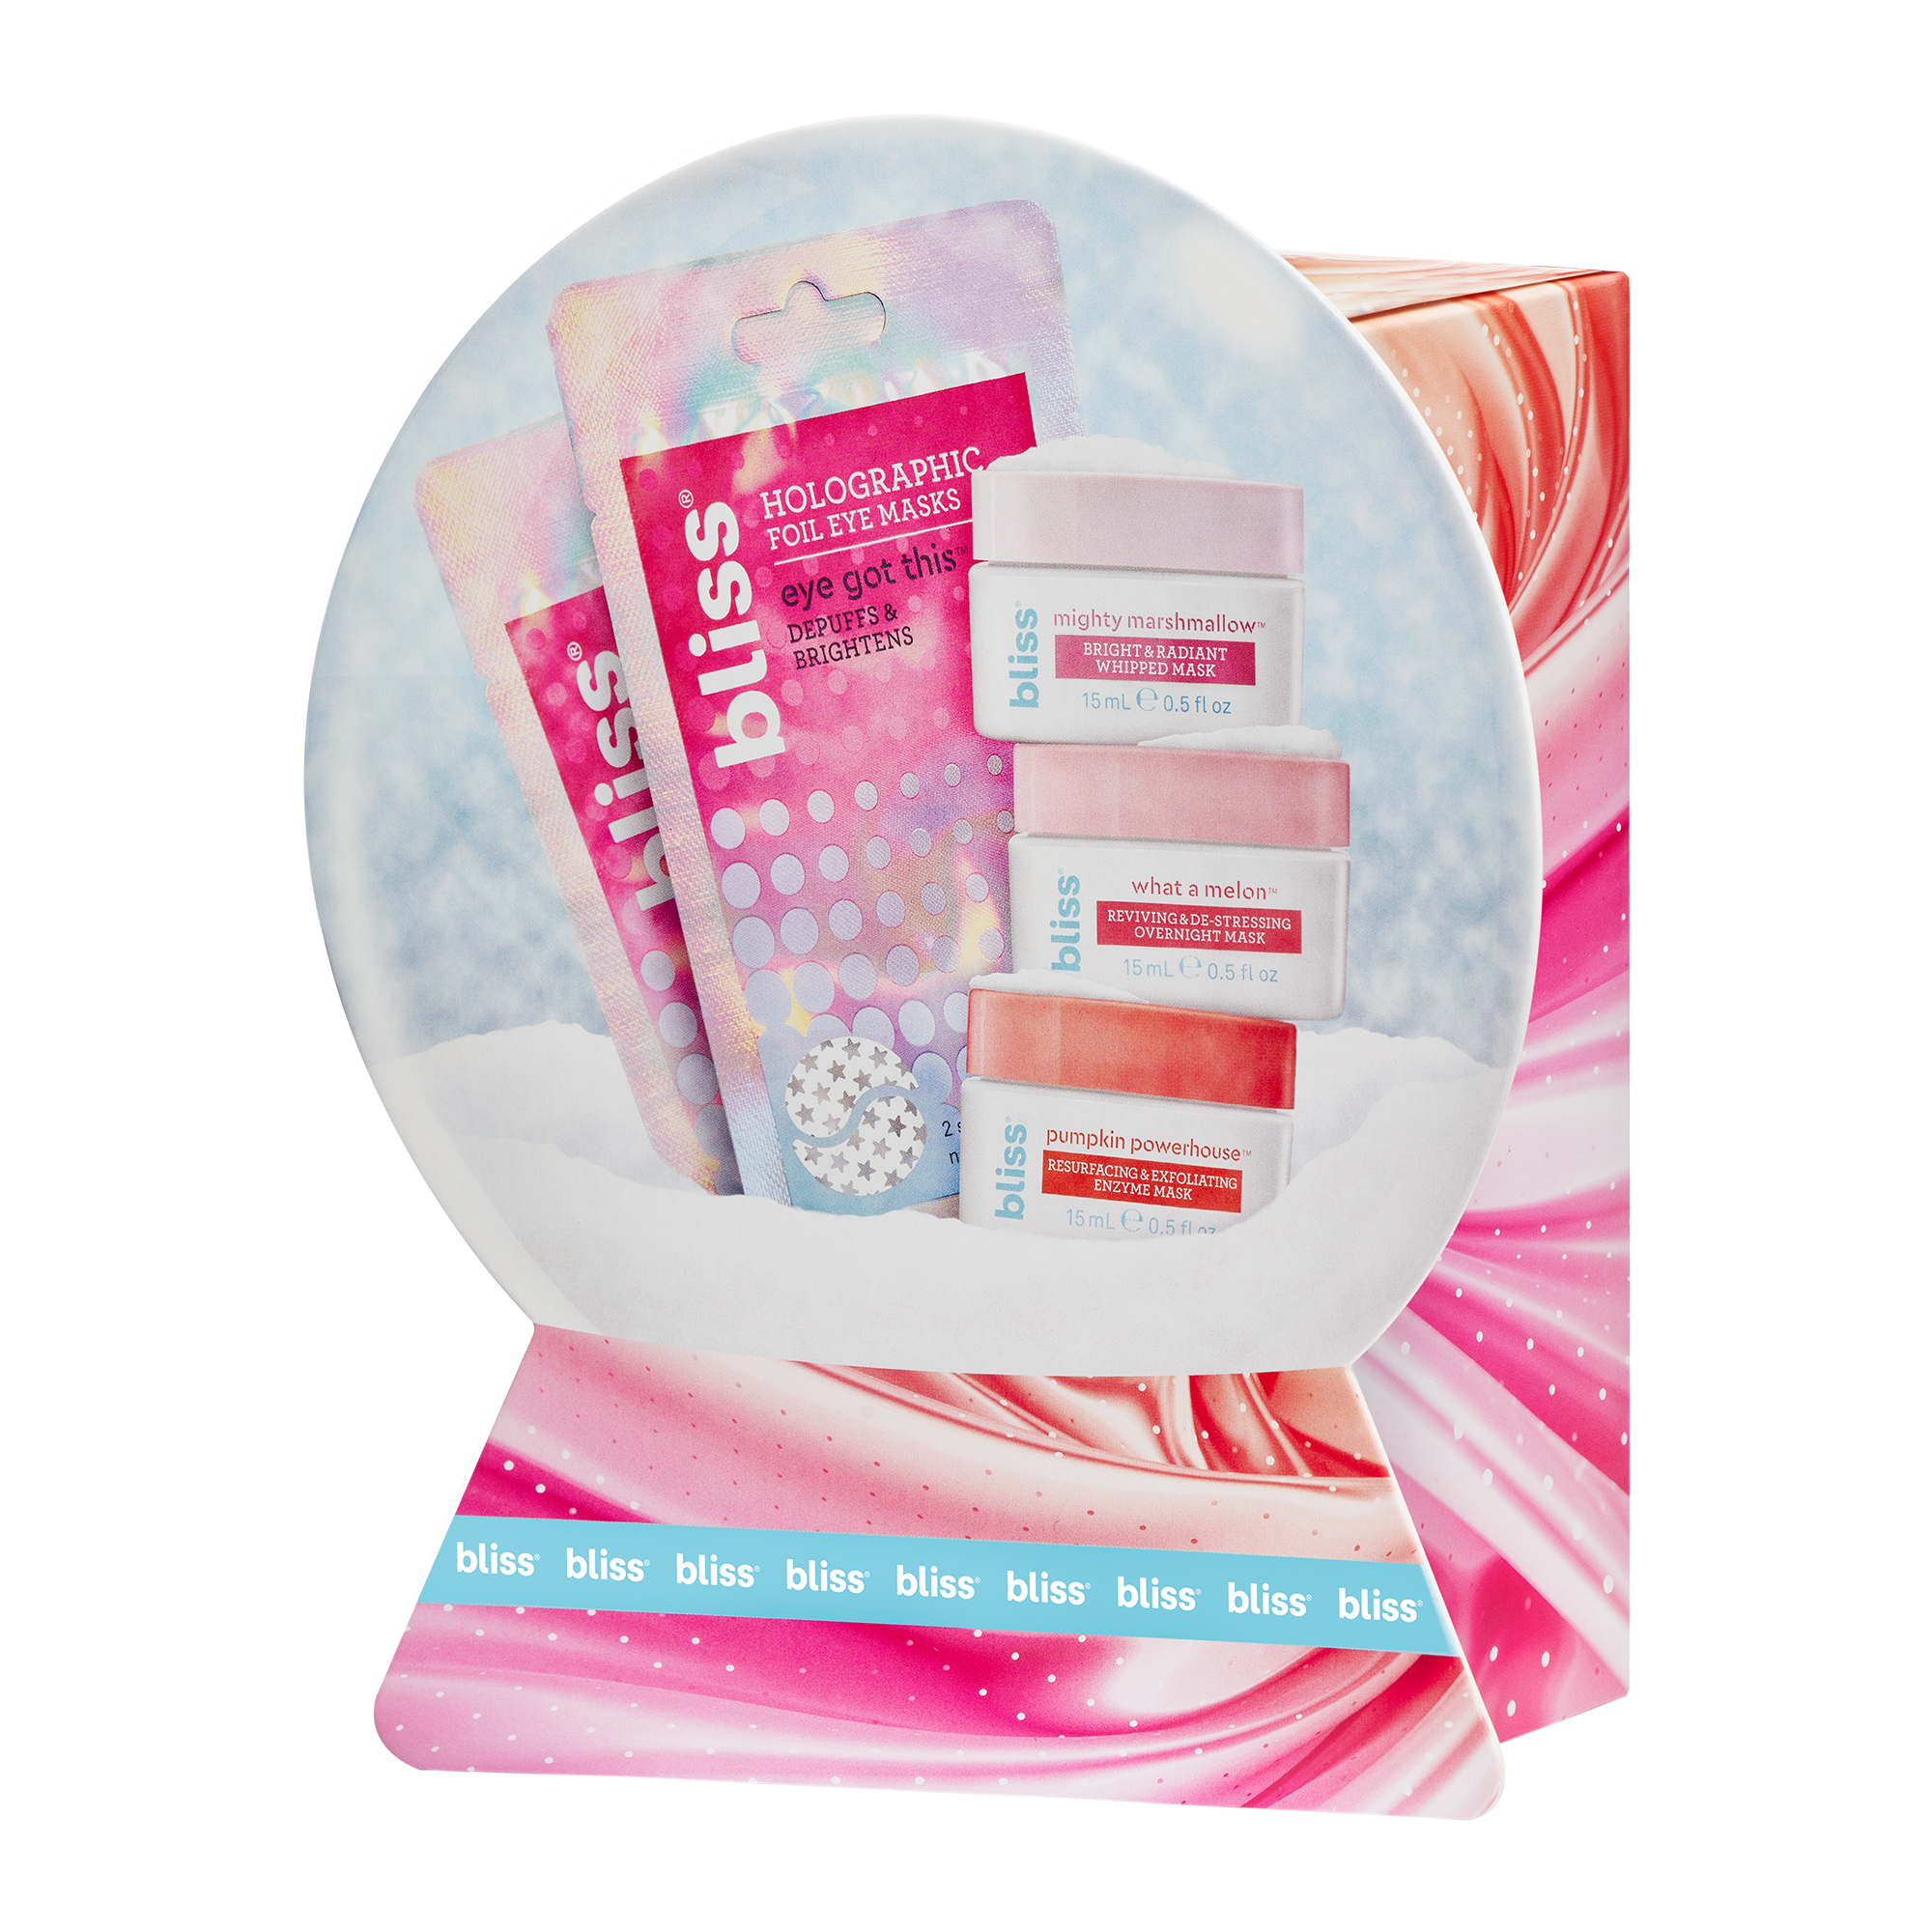 ($15 Value) Bliss Snow Globe Face Mask Set, 5 Pieces - image 2 of 8